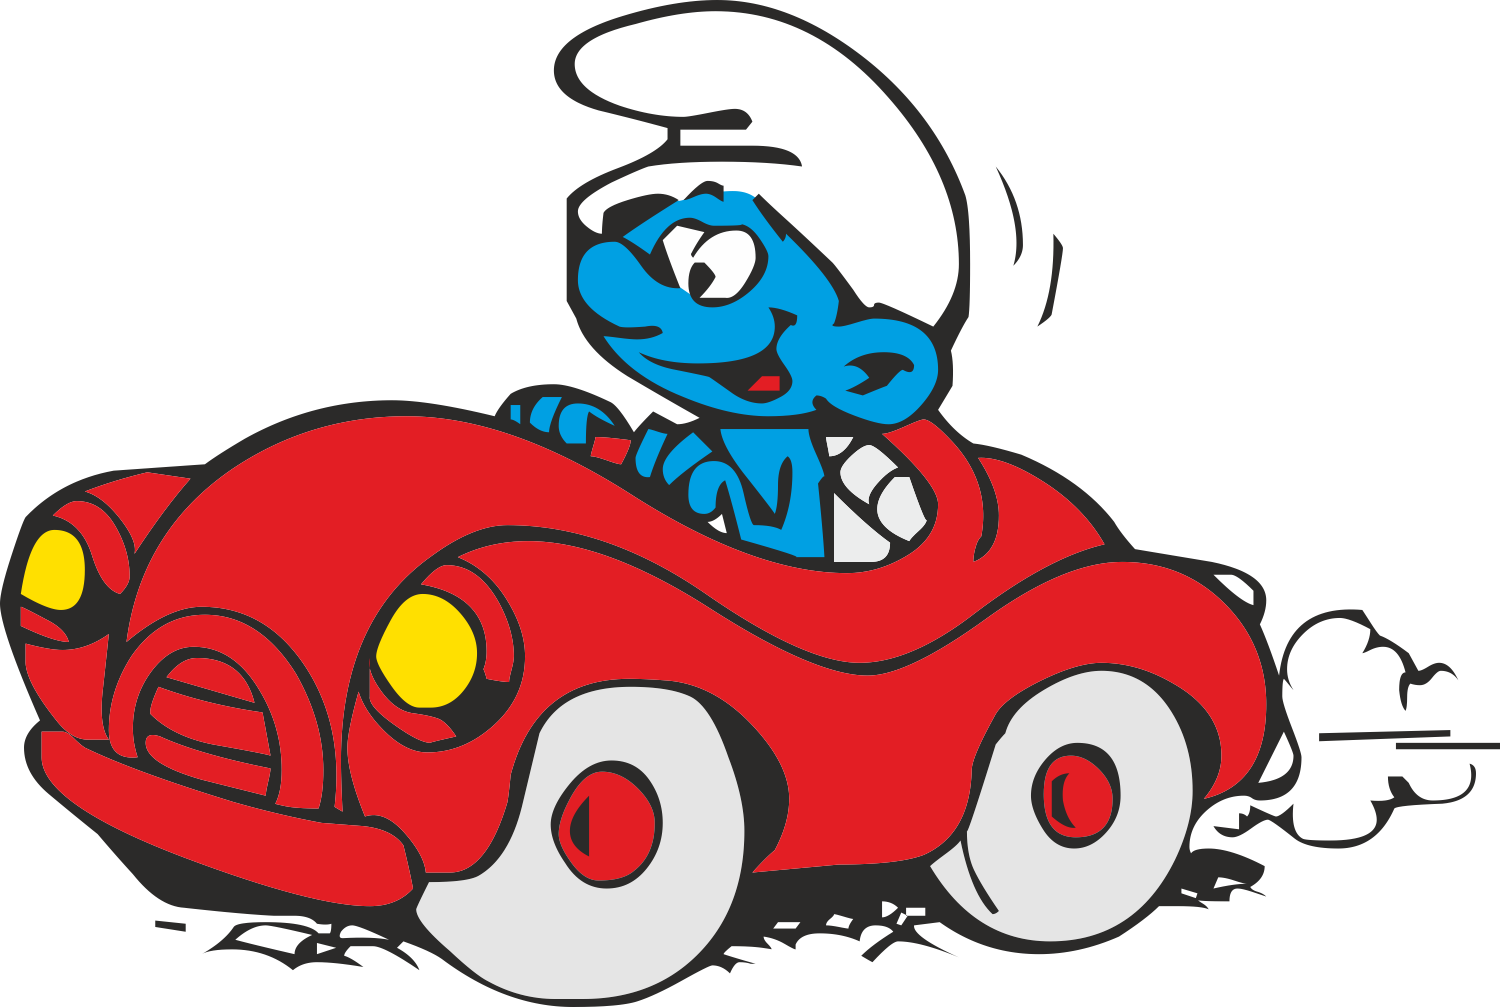 Download Smurfs Cartoon Character, Smurfs Characters, Smurfs